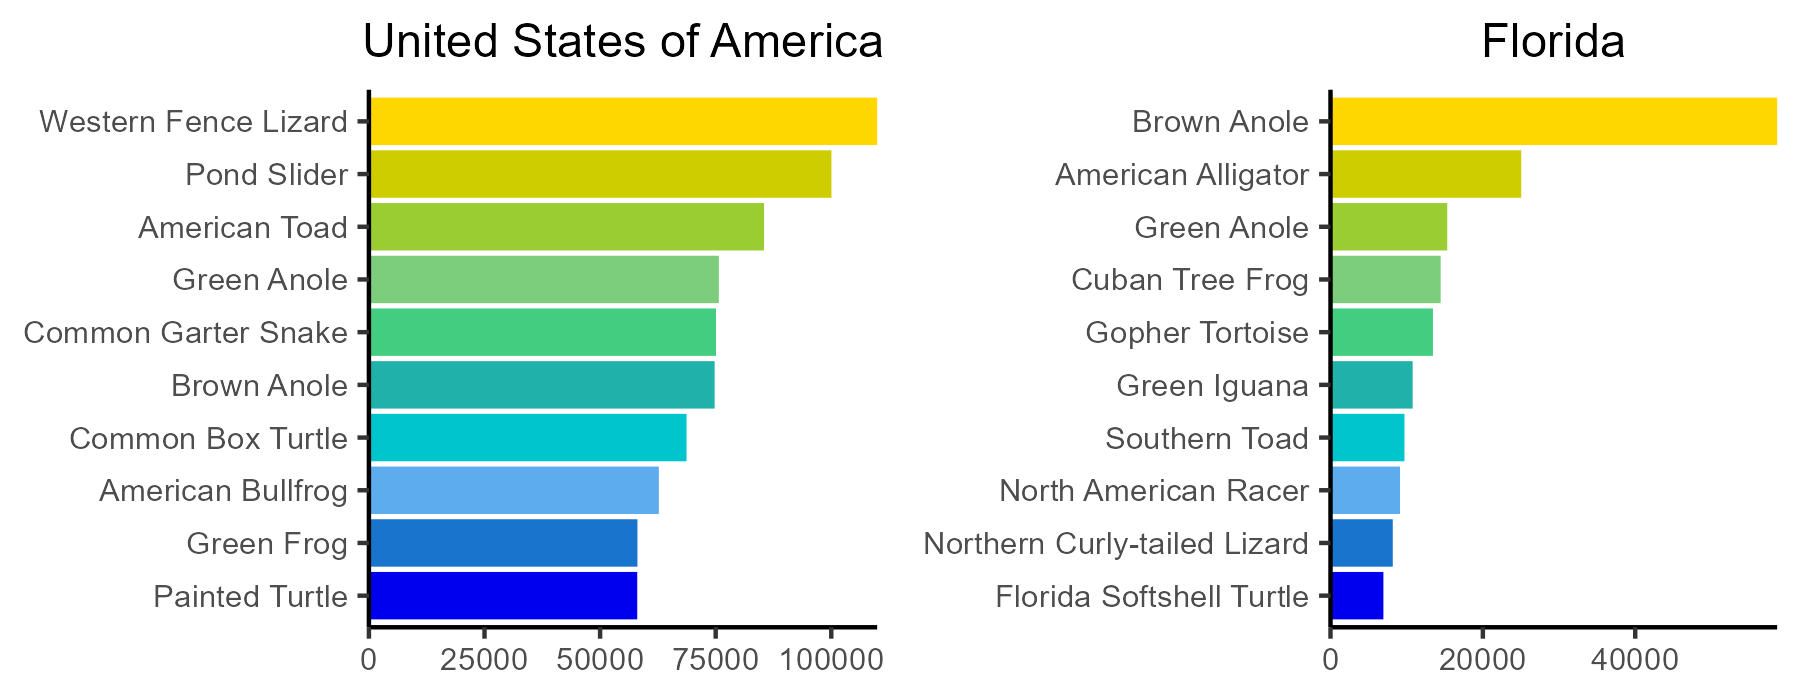 Number of iNaturalist observations for the top ten species of reptiles and amphibians observed in the United States of America and the state of Florida.